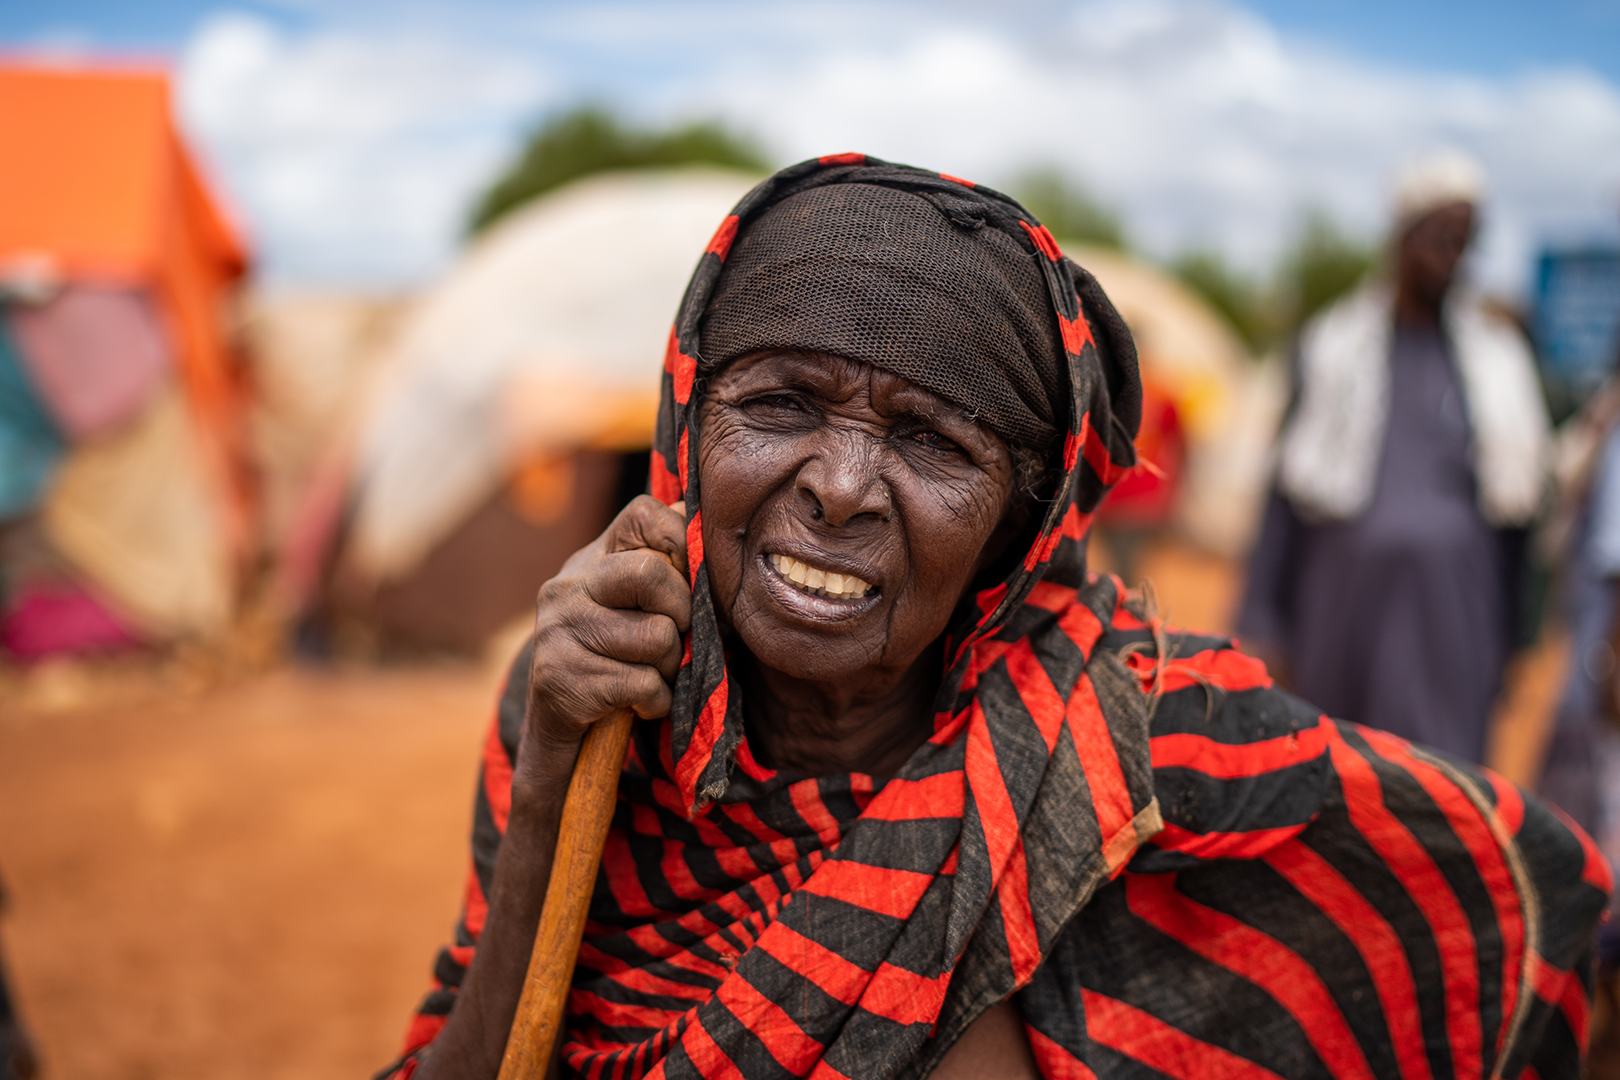  _53_https://www.helpage.org/silo/images/somalia--droughtolder-woman_1620x1080.png